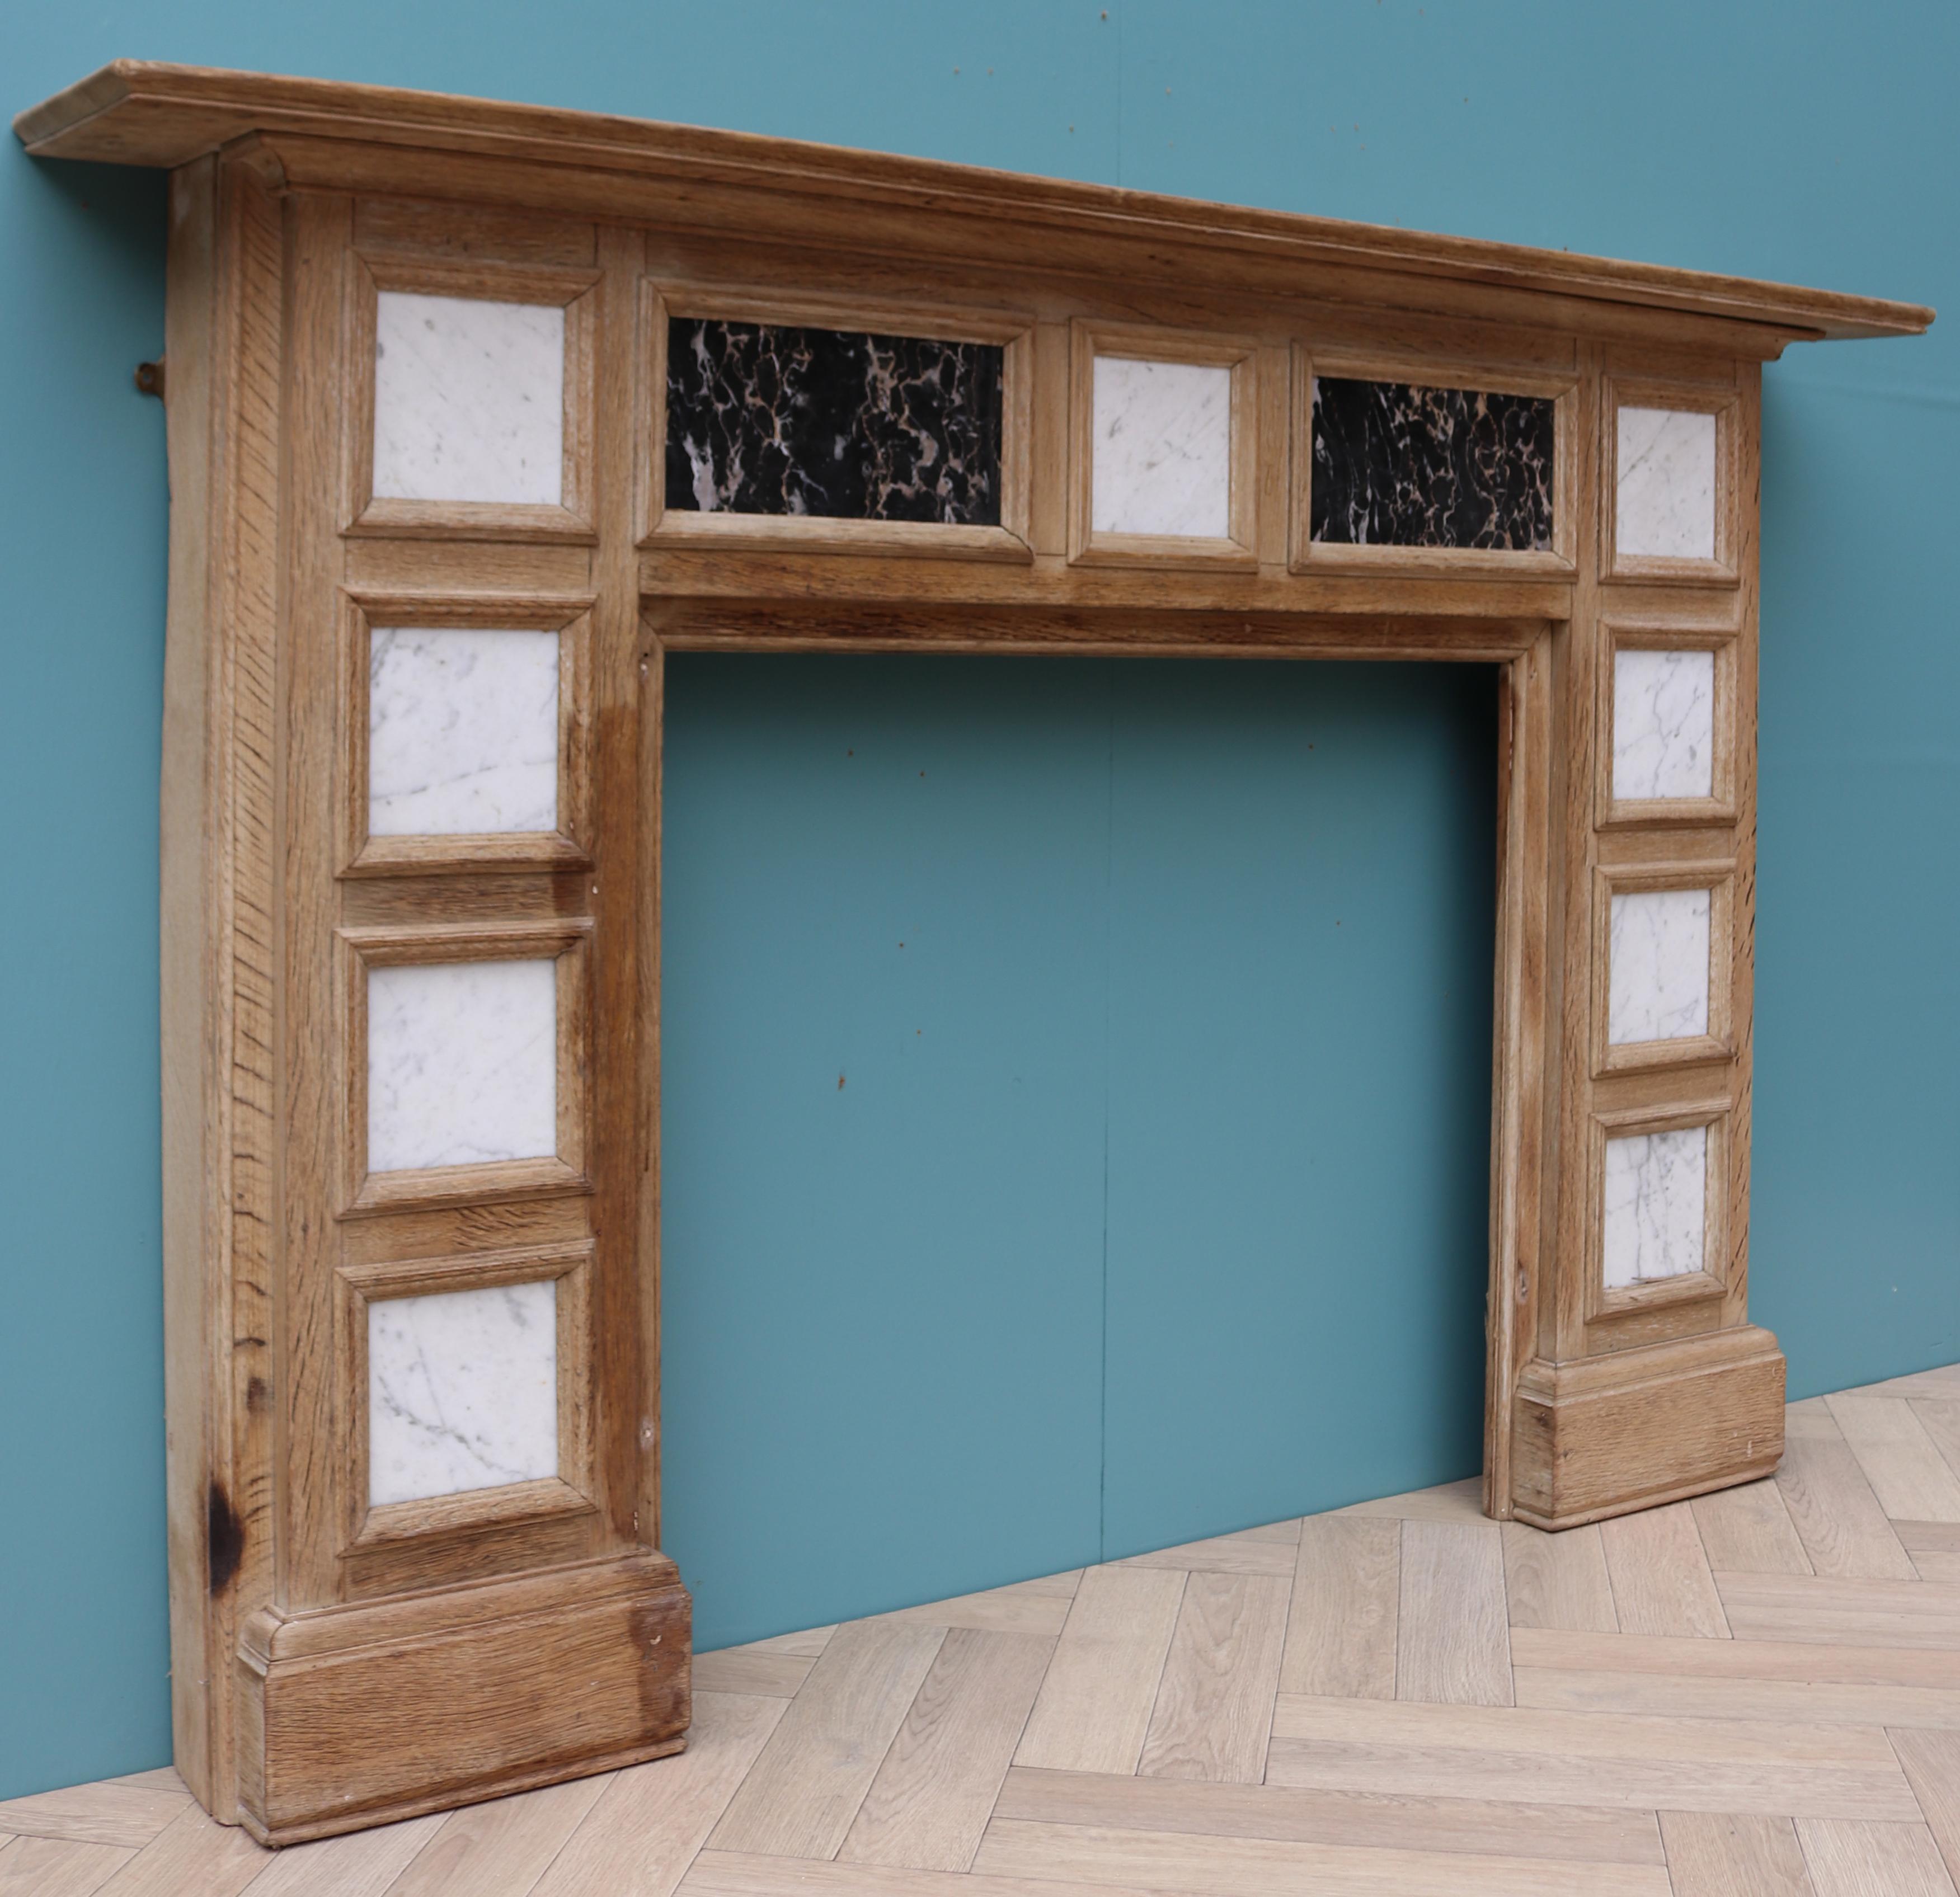 Reclaimed Oak Mantel with Marble Panels In Fair Condition For Sale In Wormelow, Herefordshire